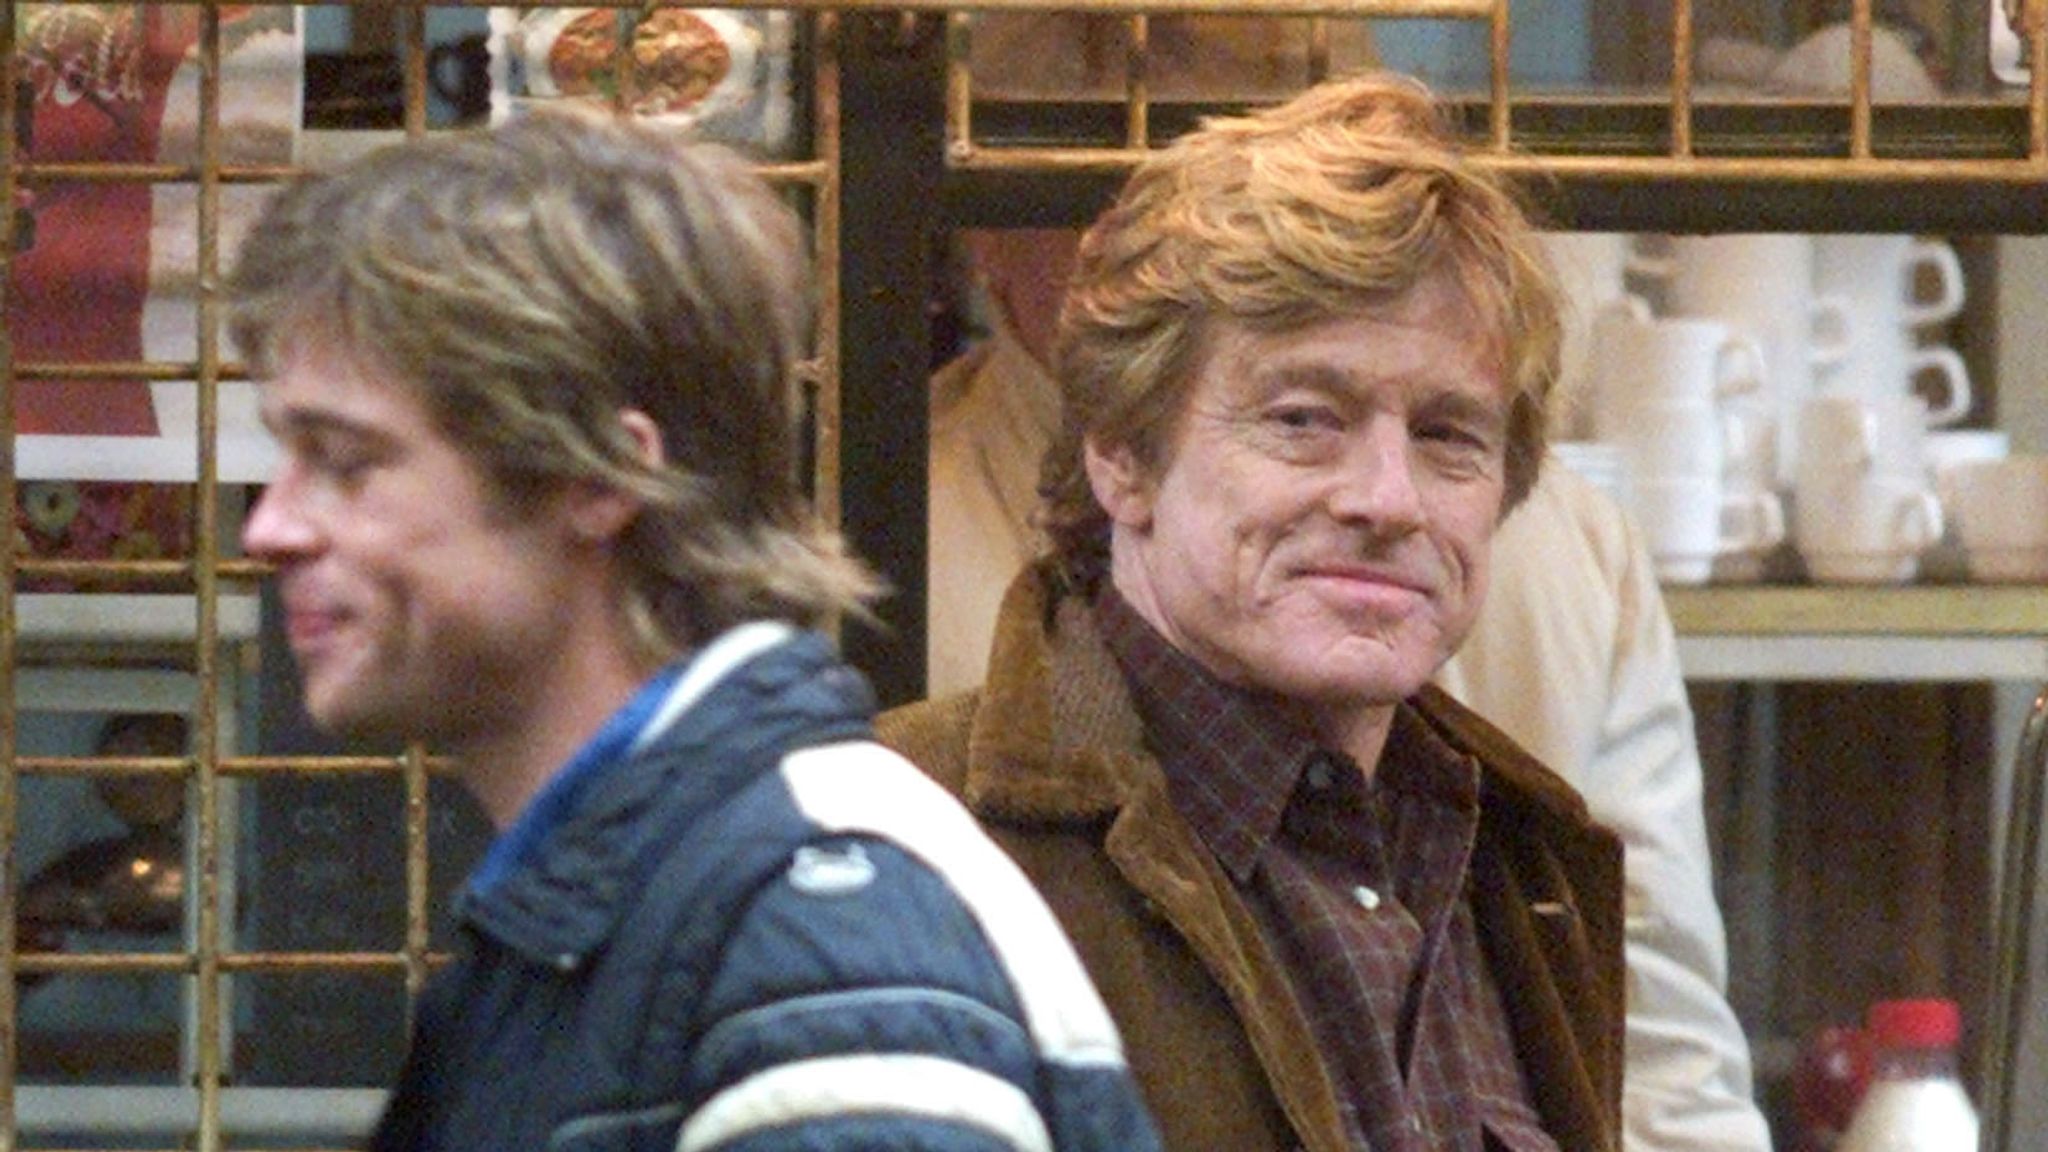 Robert Redford: Movie legend says he will quit acting after next film